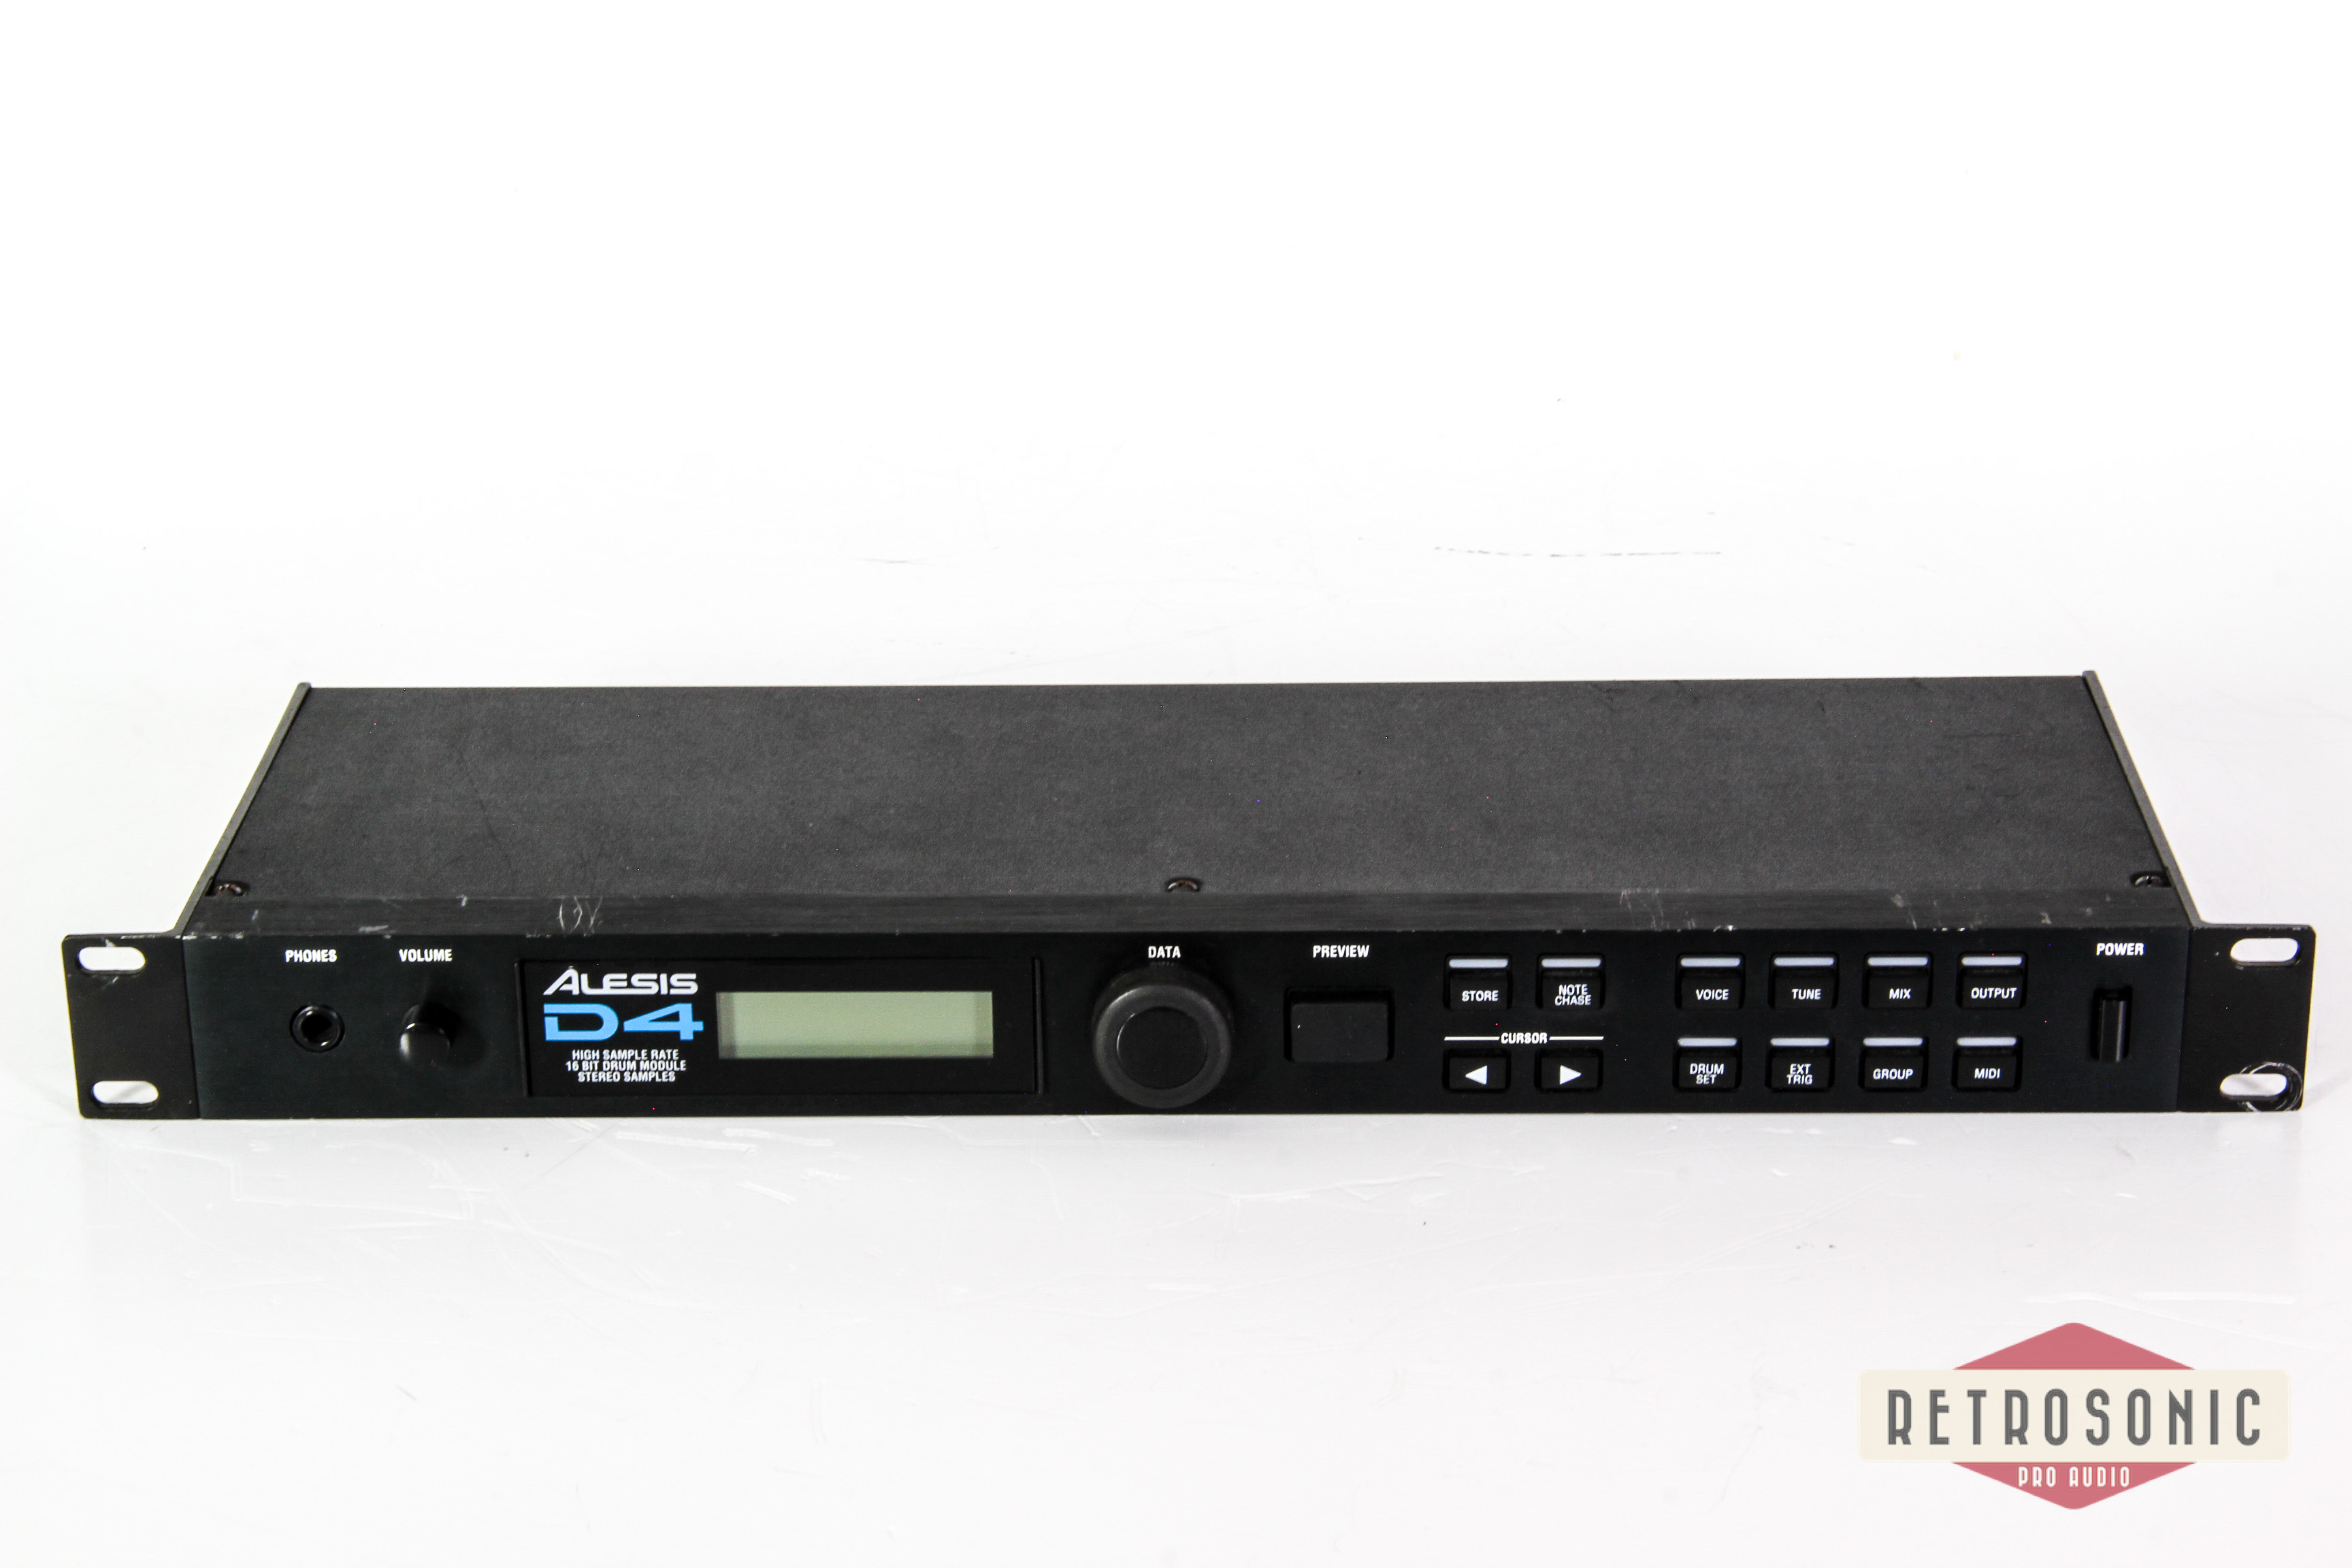 Alesis D4 Drum and Percussion sound module